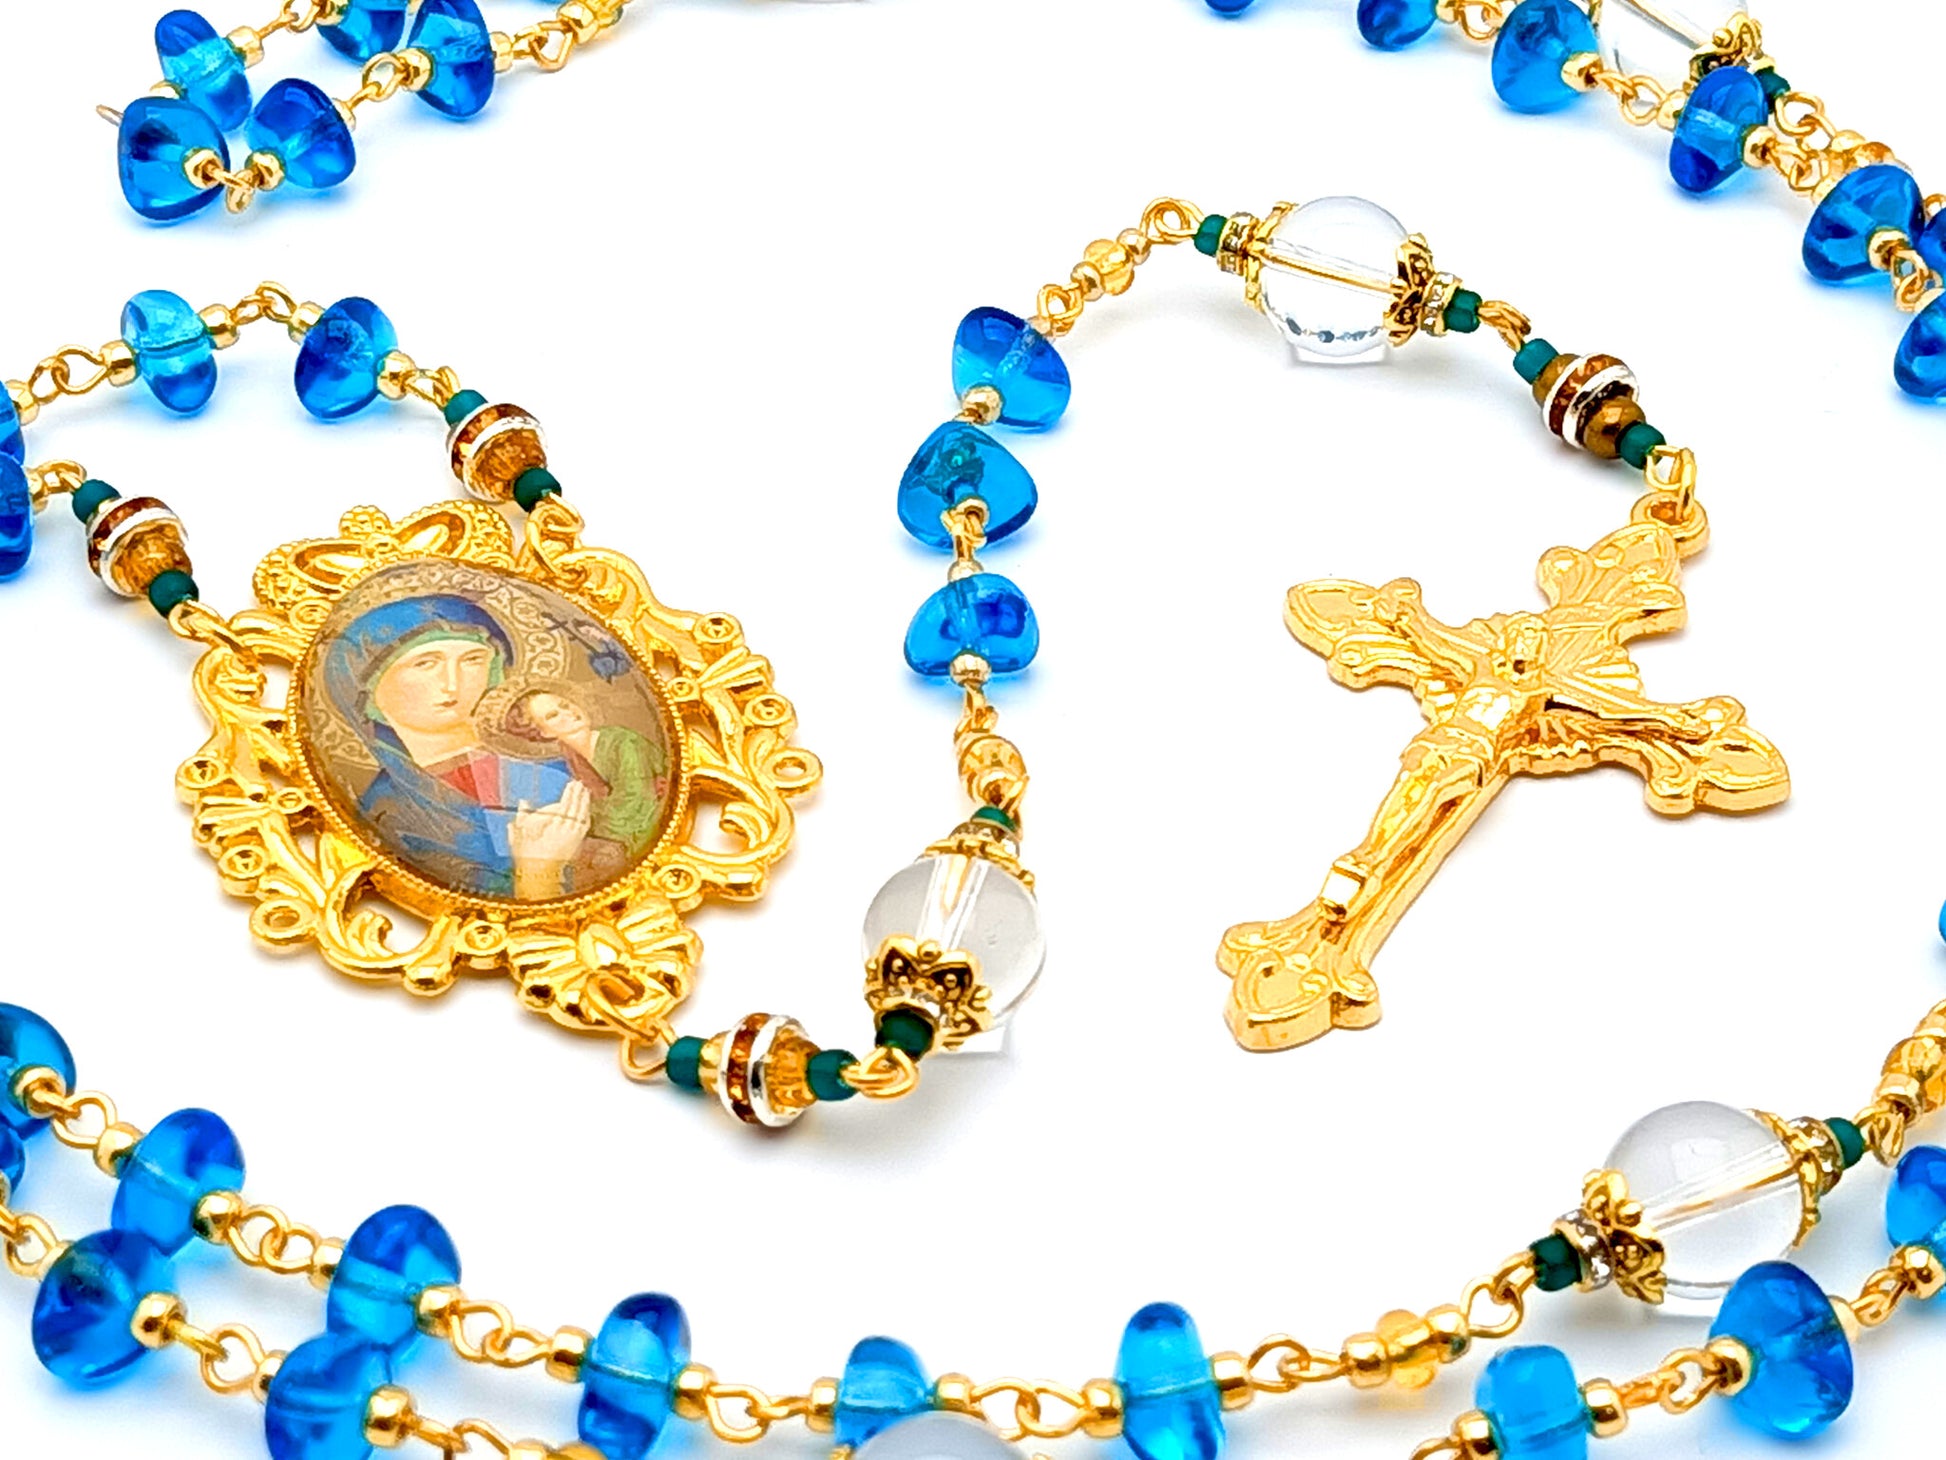 Our Lady of Perpetual Help unique rosary beads with nugget glass and crystal gemstone beads and gold plated sunburst crucifix.